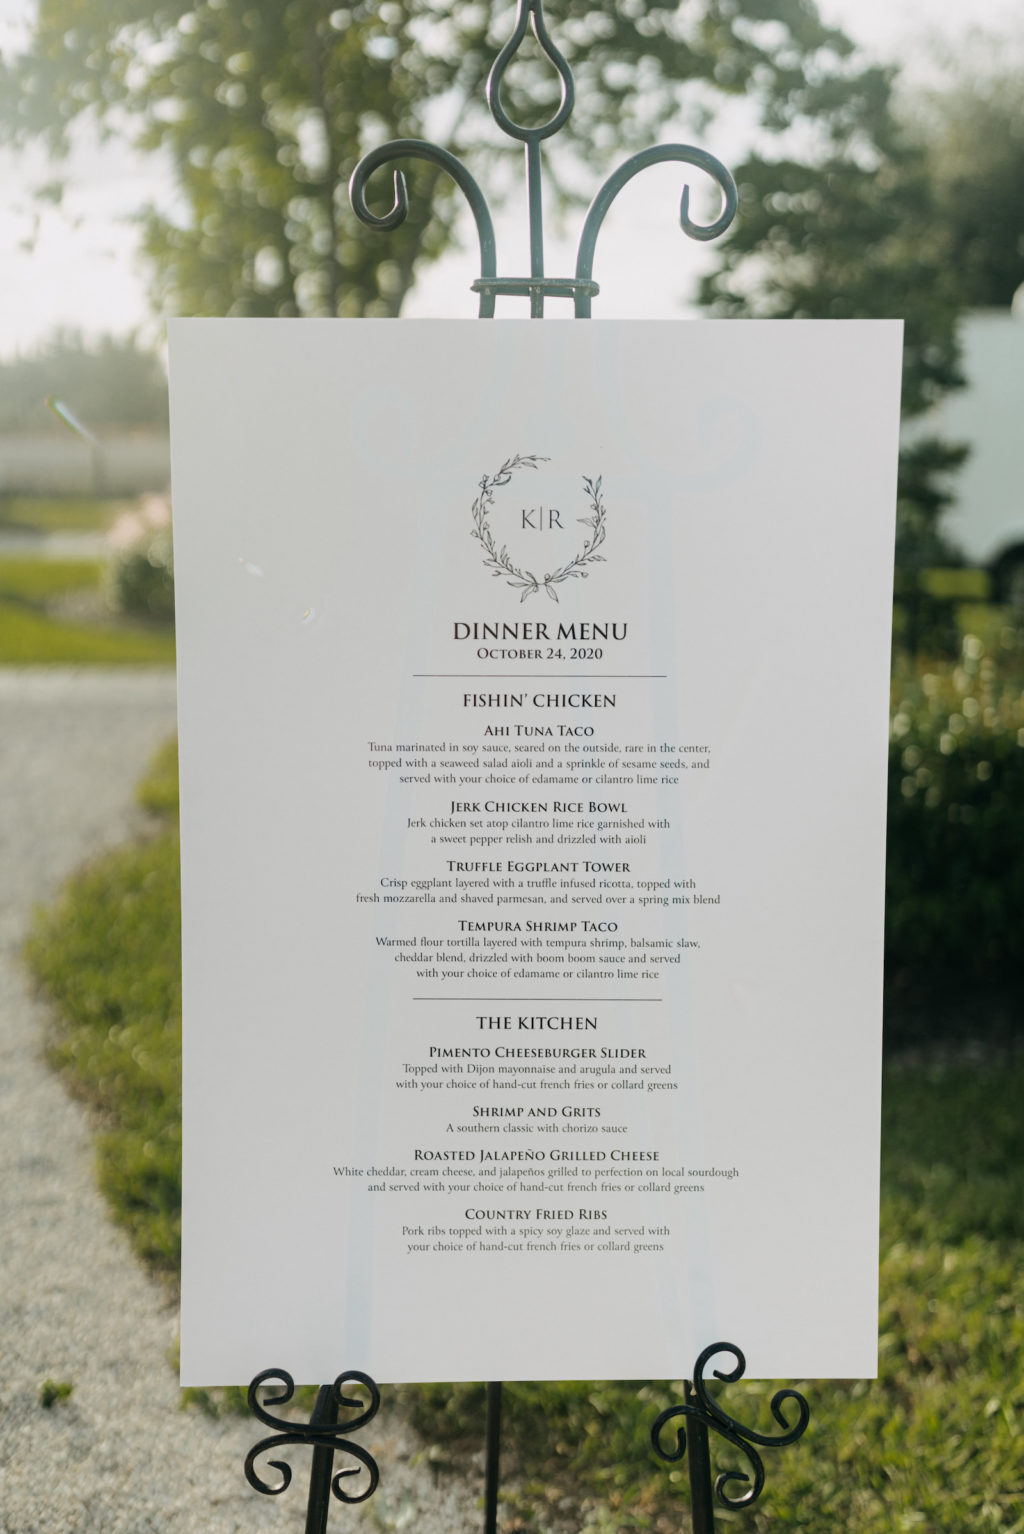 Classic White and Black Printed Dinner Menu Signage | Tampa Bay Wedding Photographer Amber McWhorter Photography